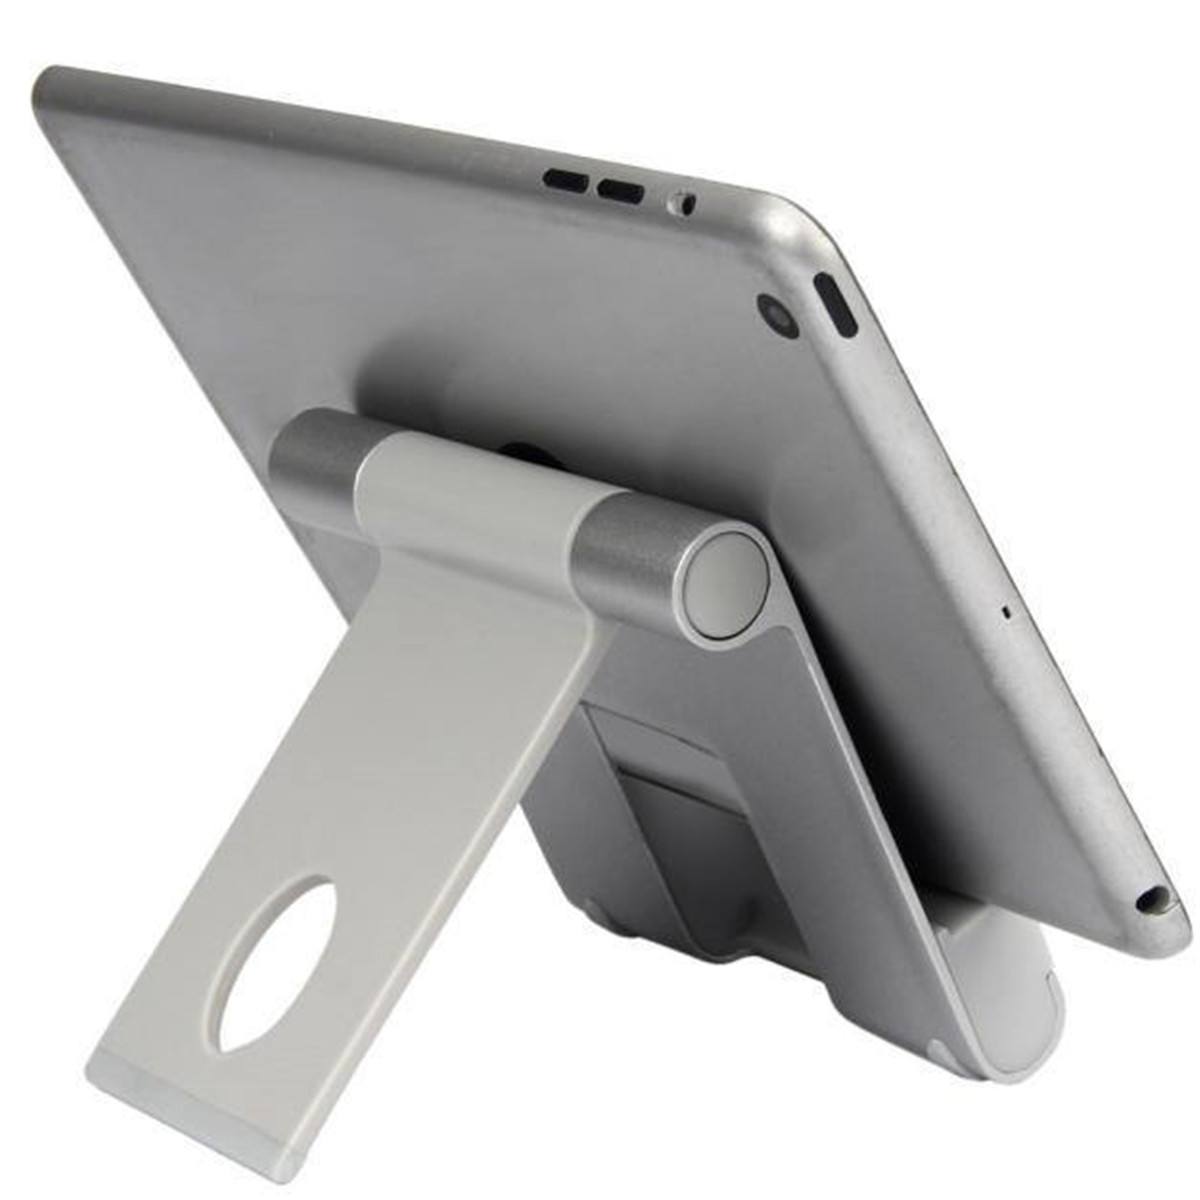 Aluminum-Alloy-Phone-Charging-Holder-Tablet-Stand-For-Smart-PhoneTablet-PCiPhoneiPad-1301330-4